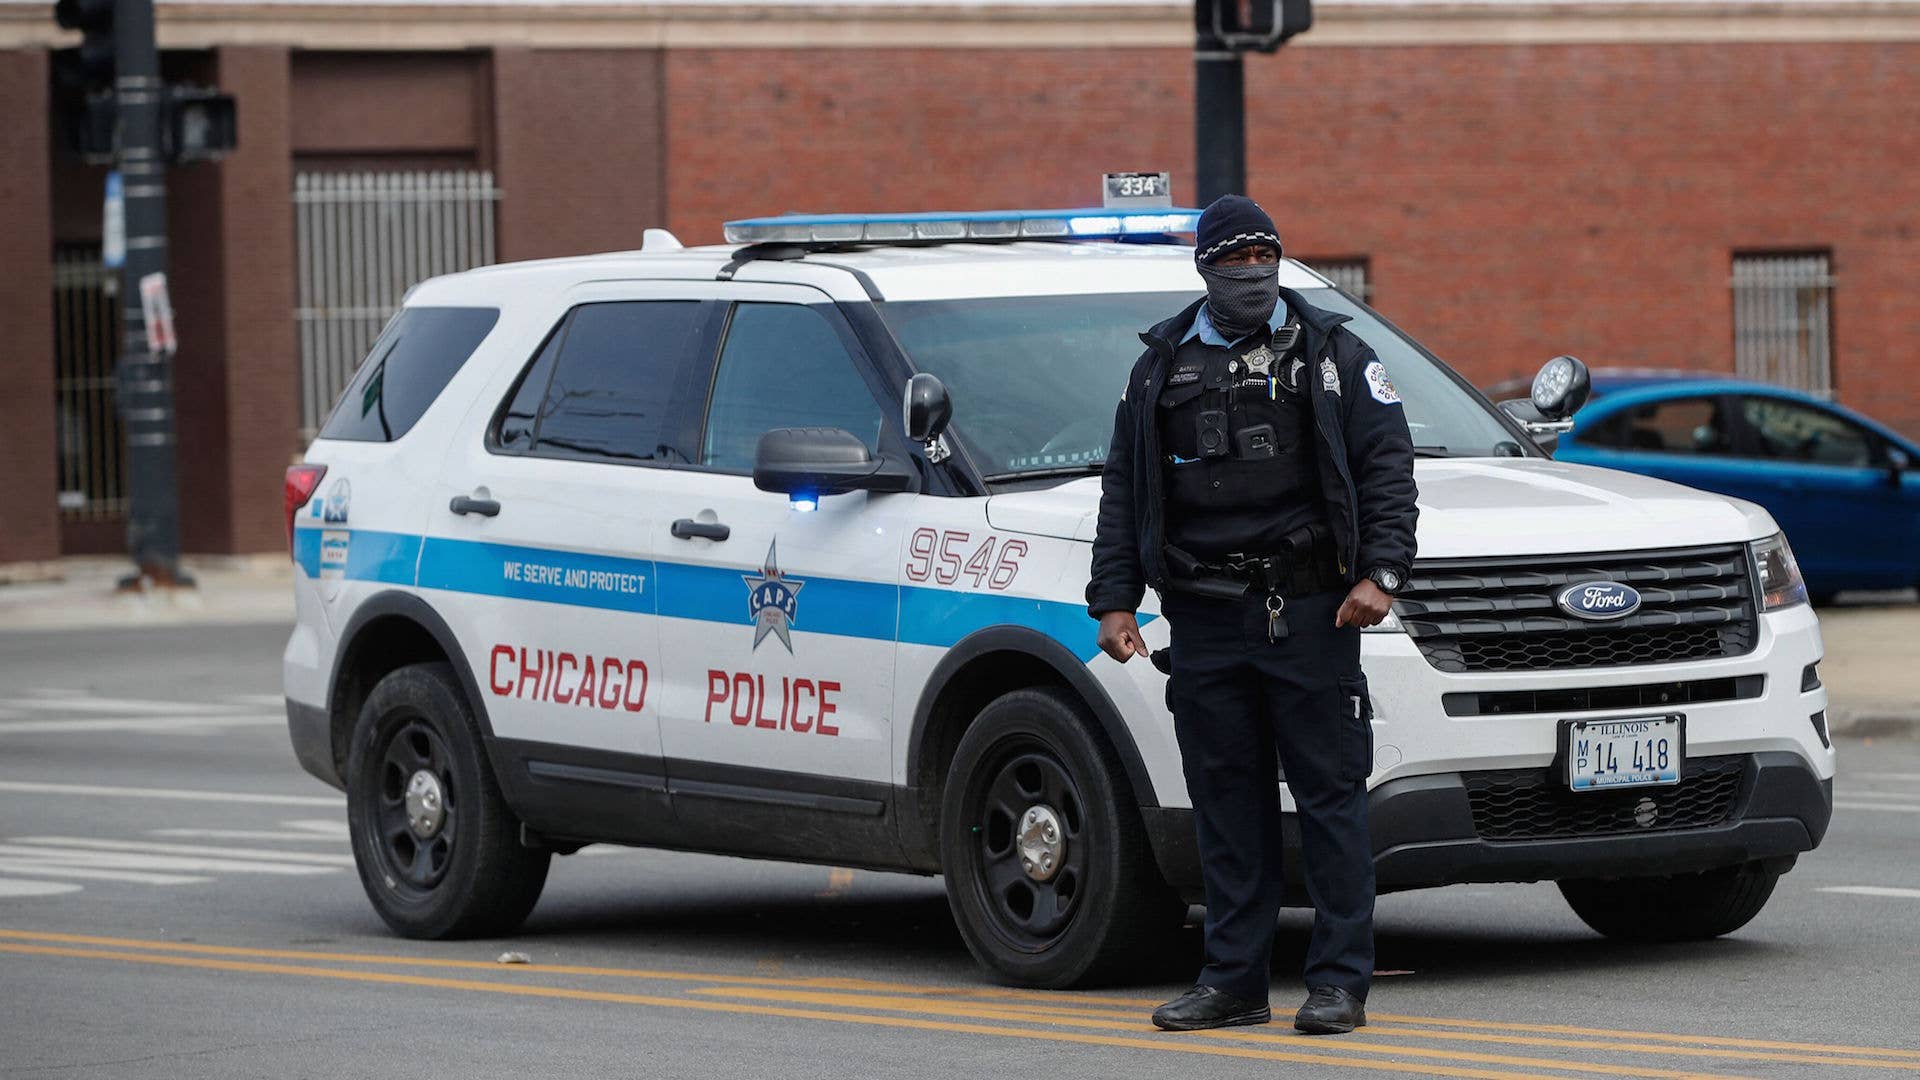 Chicago Police officer monitors